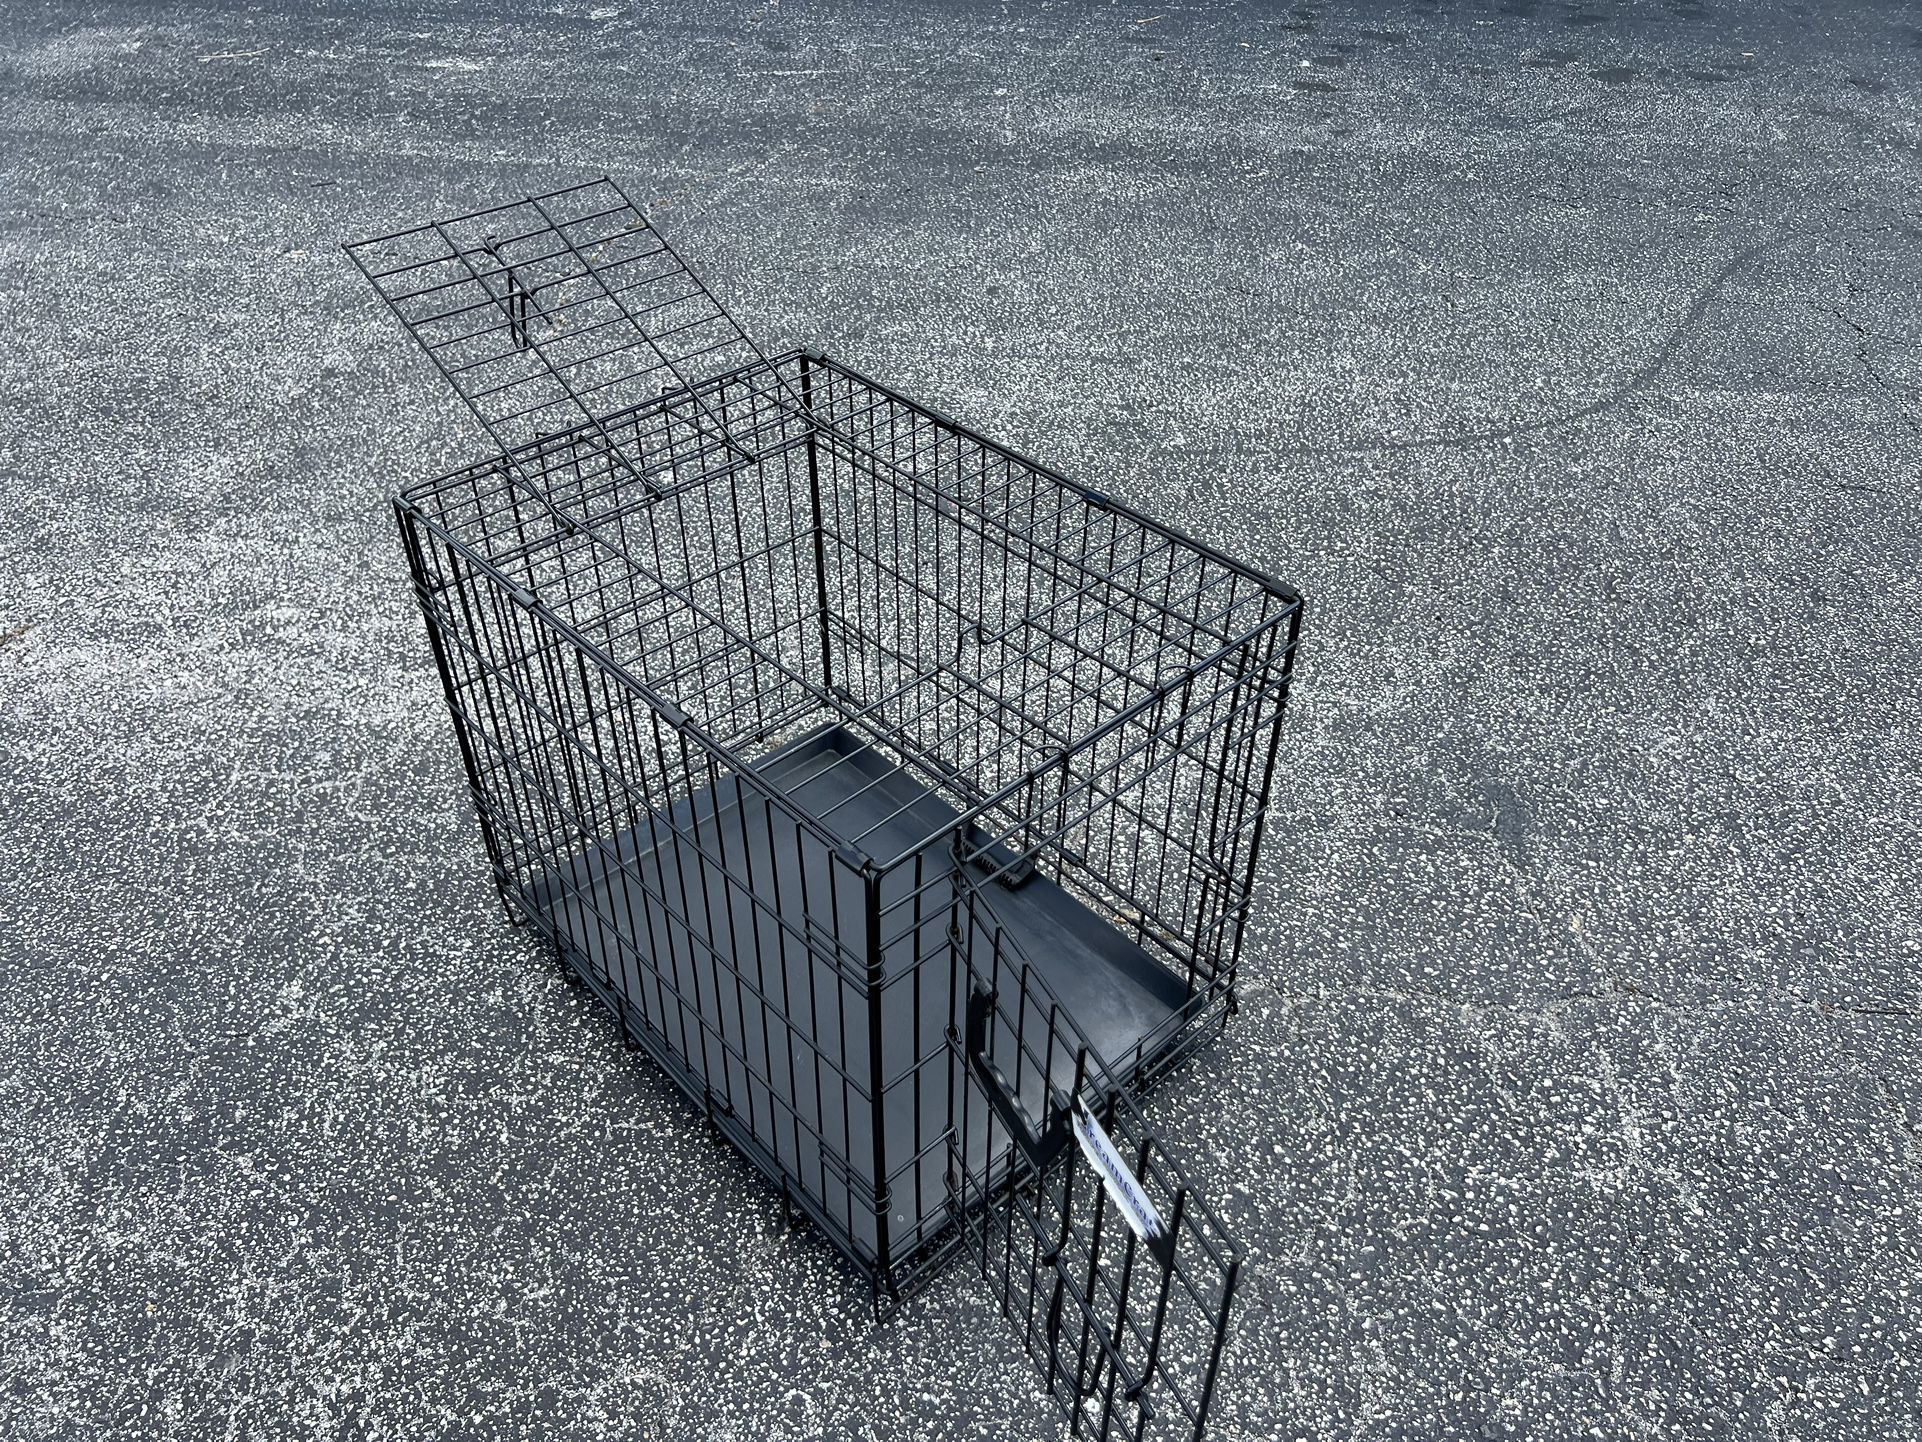 24x17x20in Black Metal Double Door Dog Pet Animal Cage Containment Crate! Great for dogs 30lbs and under. 